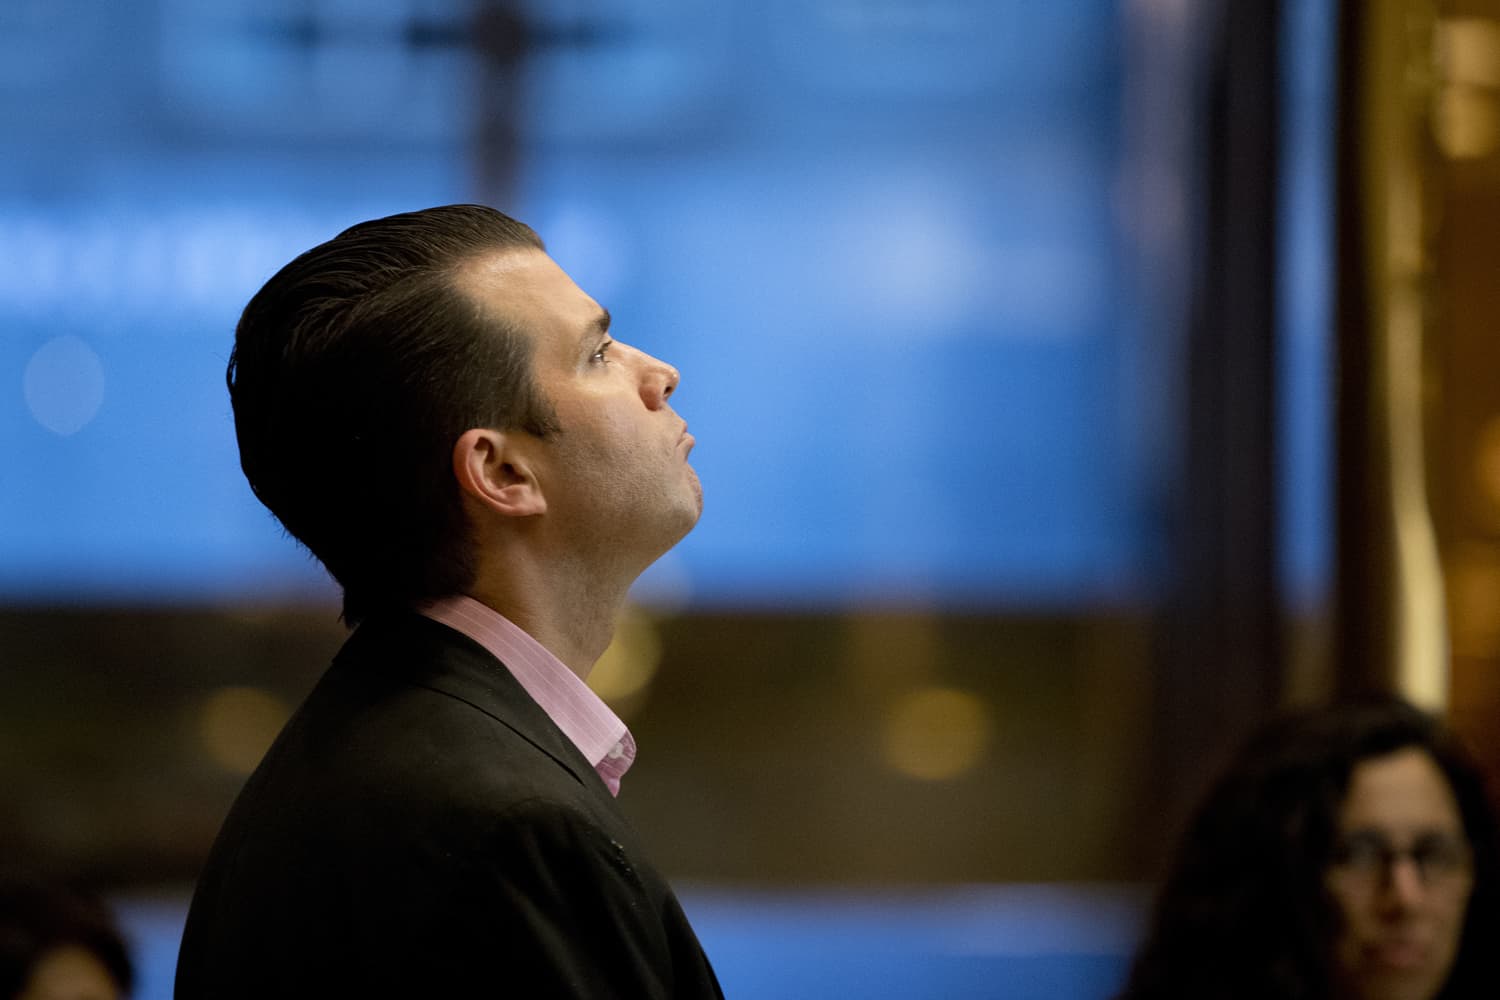 Donald Trump Jr., son of President Donald Trump, waits for an elevator at Trump Tower, Tuesday, Nov. 15, 2016 in New York. (Carolyn Kaster/AP)